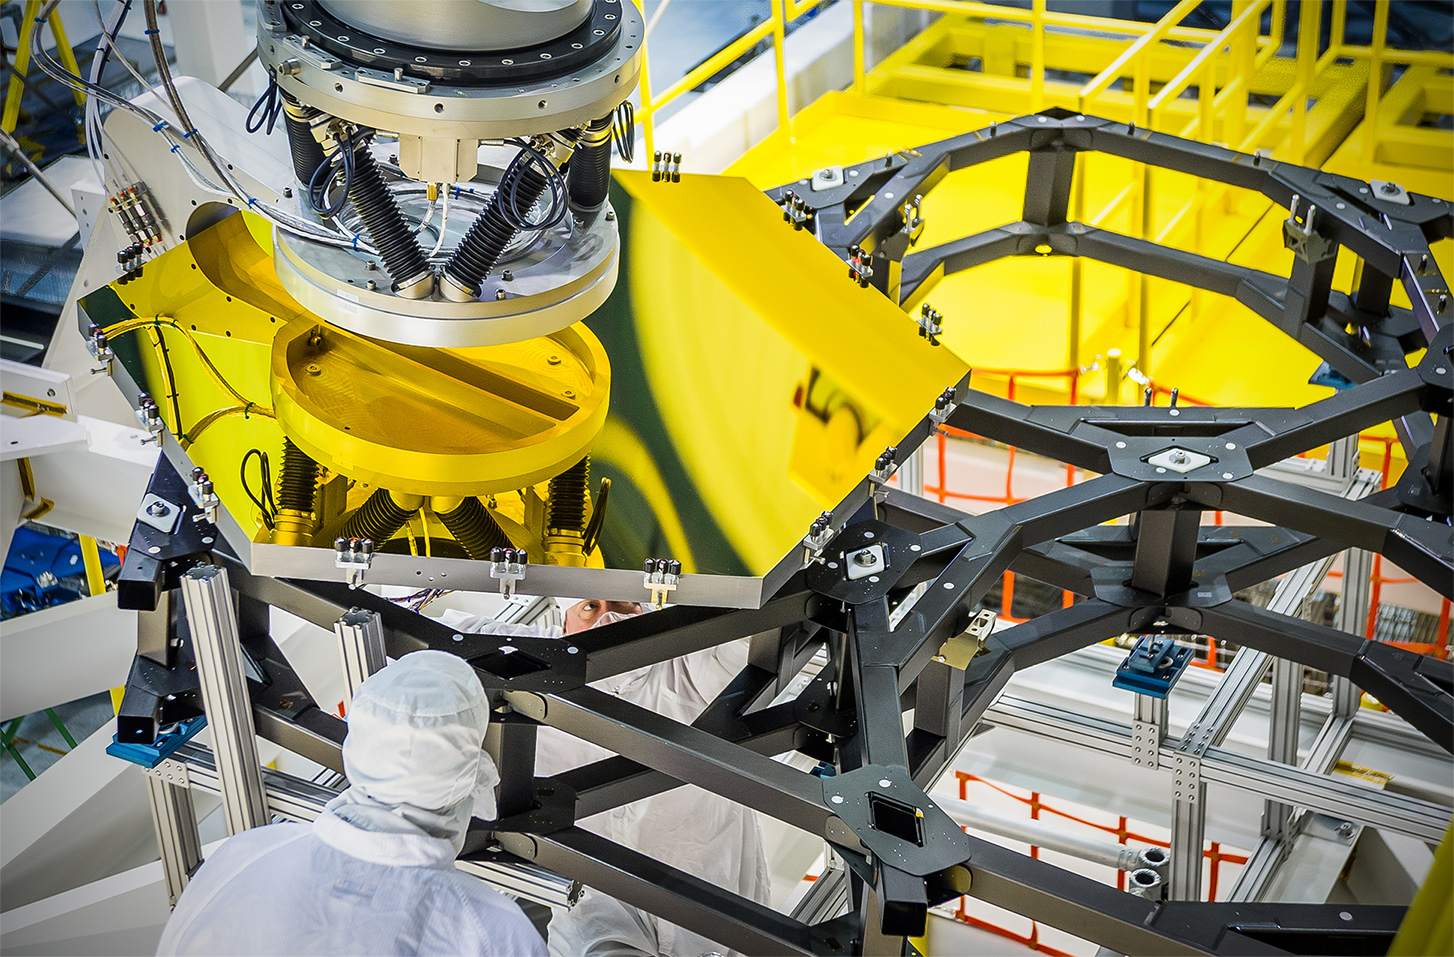 A robotic arm lifts and lowers a golden James Webb Space Telescope flight spare primary mirror segment onto a test piece of backplane at NASA's Goddard Space Flight Center in Greenbelt, Md. In this image the JWST team practices the positioning that will be done on the actual telescope in the cleanroom. Dave Sime, an assembly crew chief, inspects the mirror placement from the underside of the backplane. Photo Credit: NASA/Chris Gunn